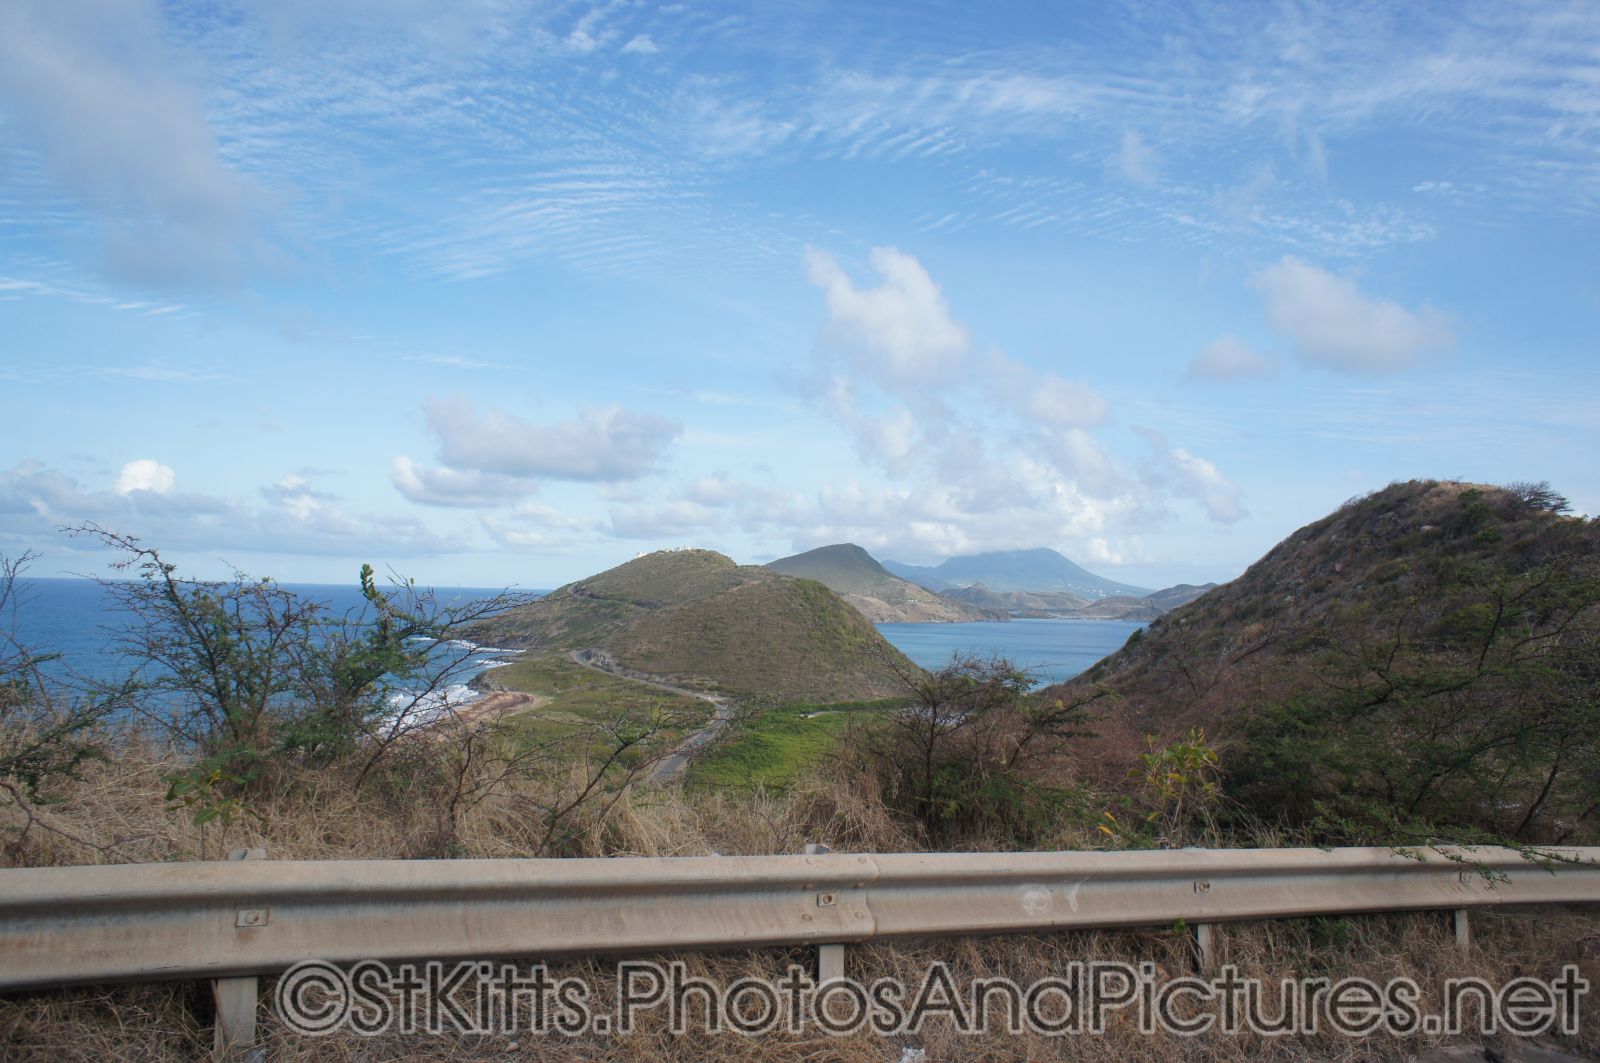 Nice view of oceans and hills in St Kitts.jpg
